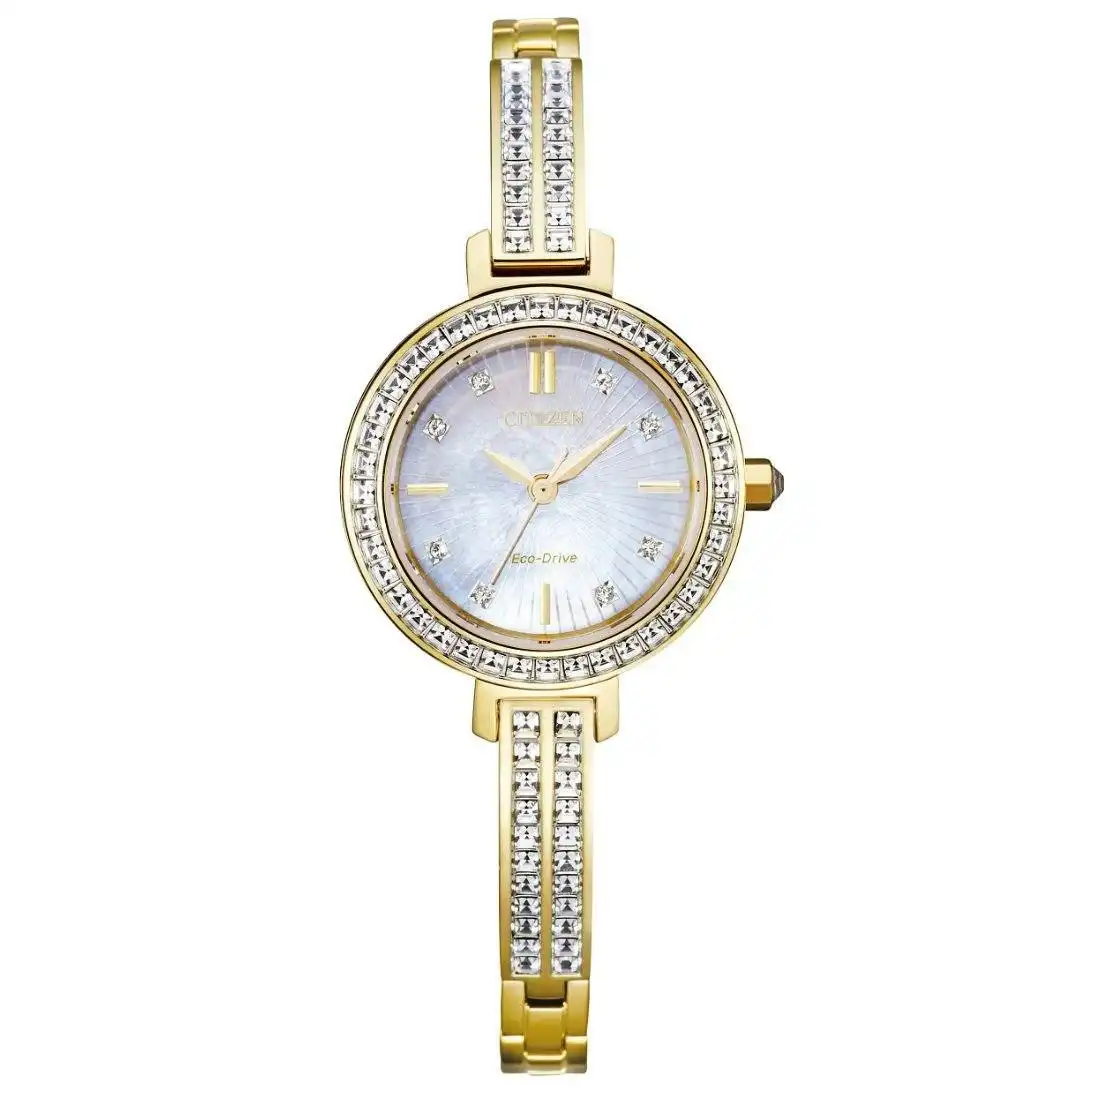 Citizen Eco Drive White and Gold Women's Watch EM0862-56D